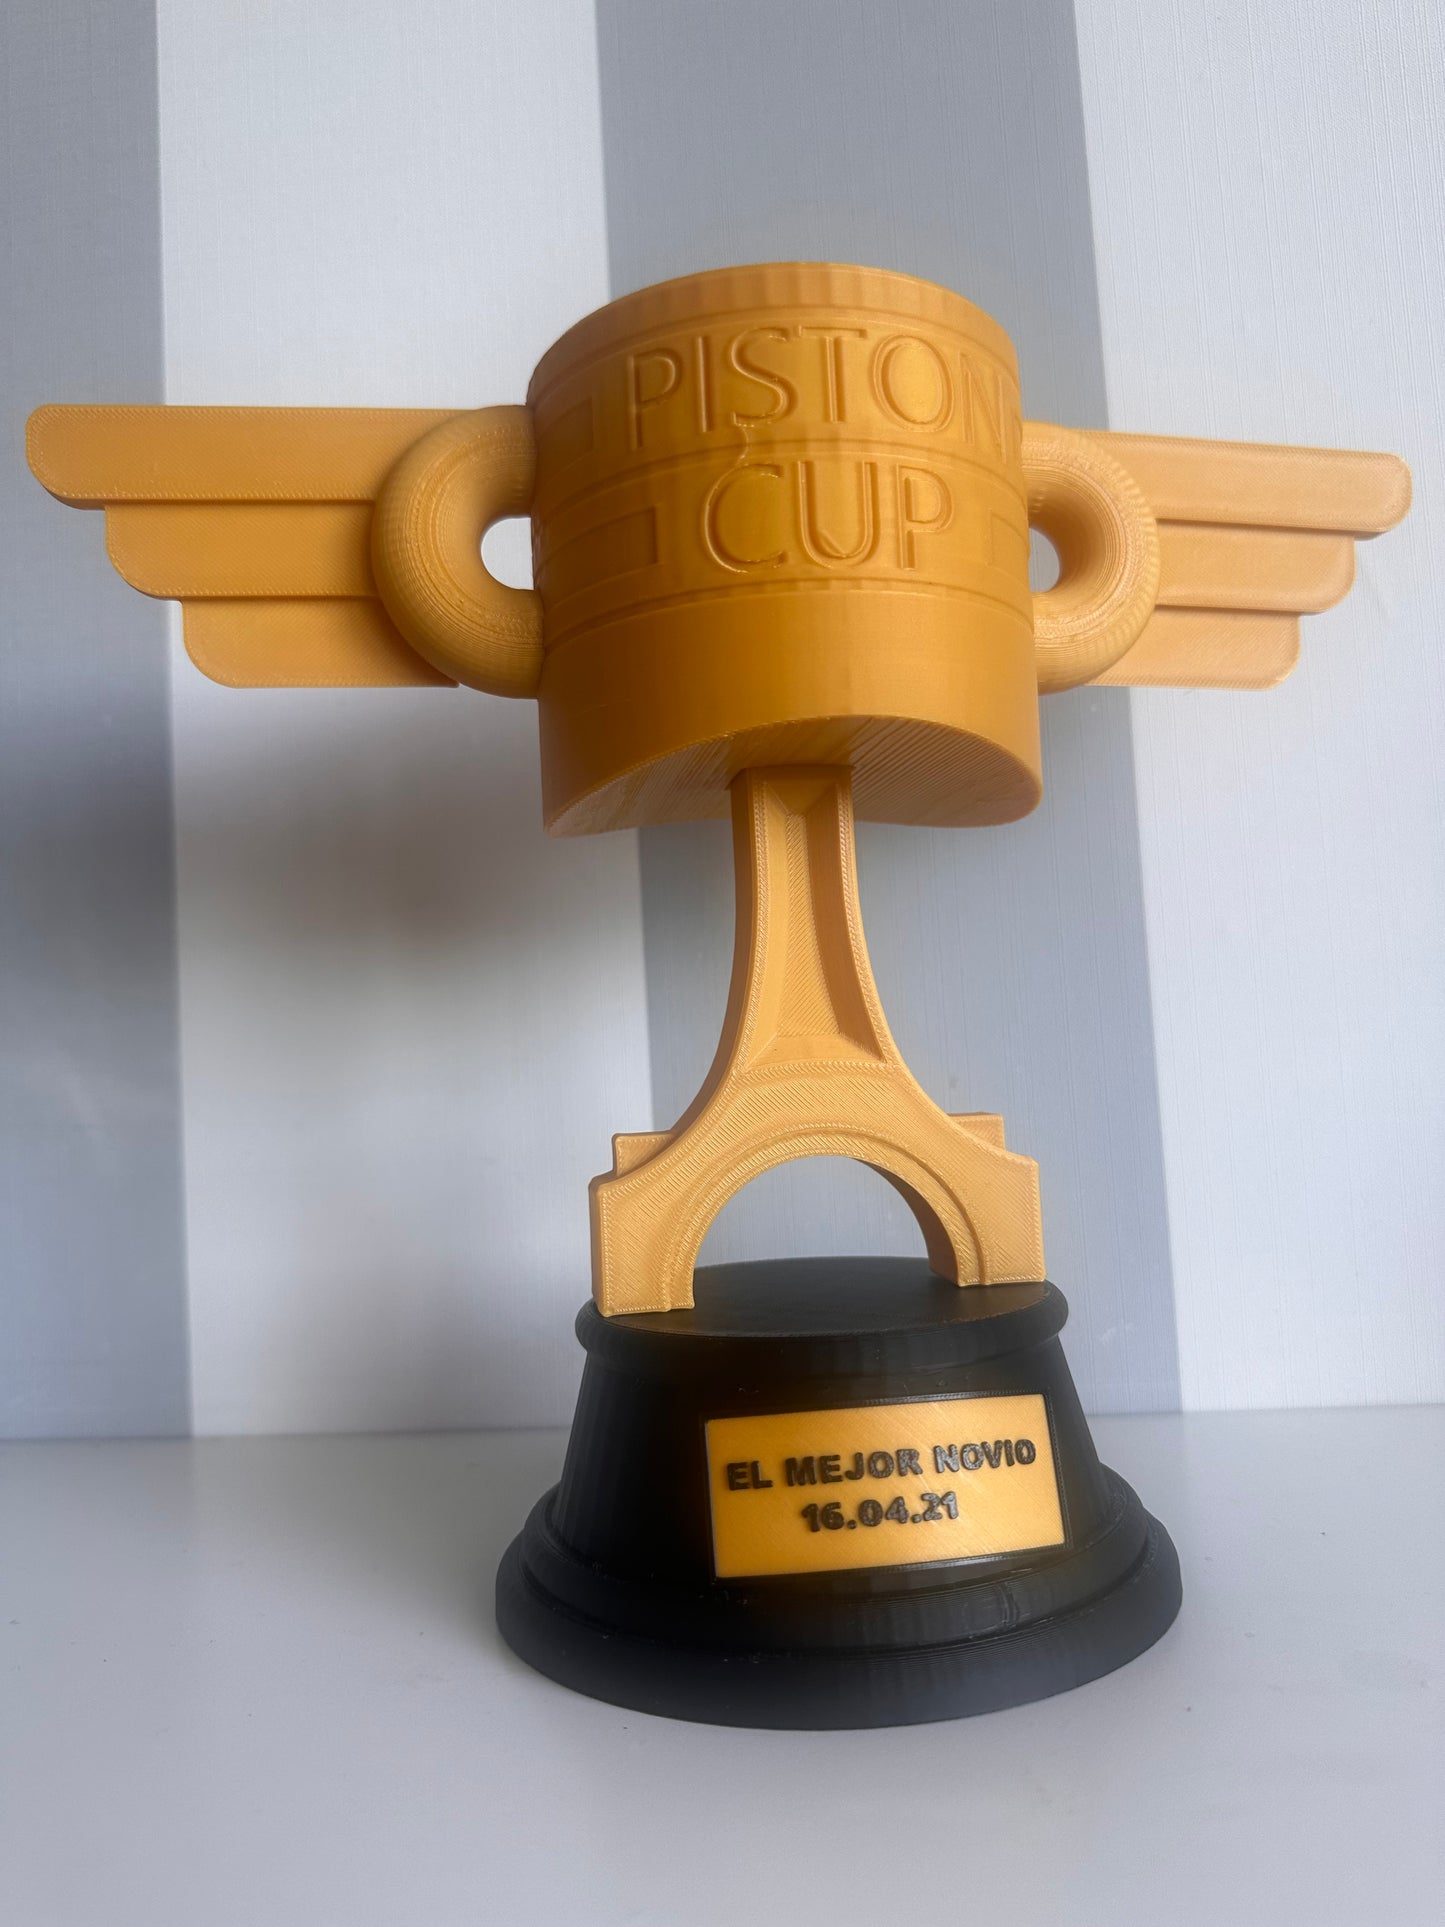 Piston Cars Cup Trophy